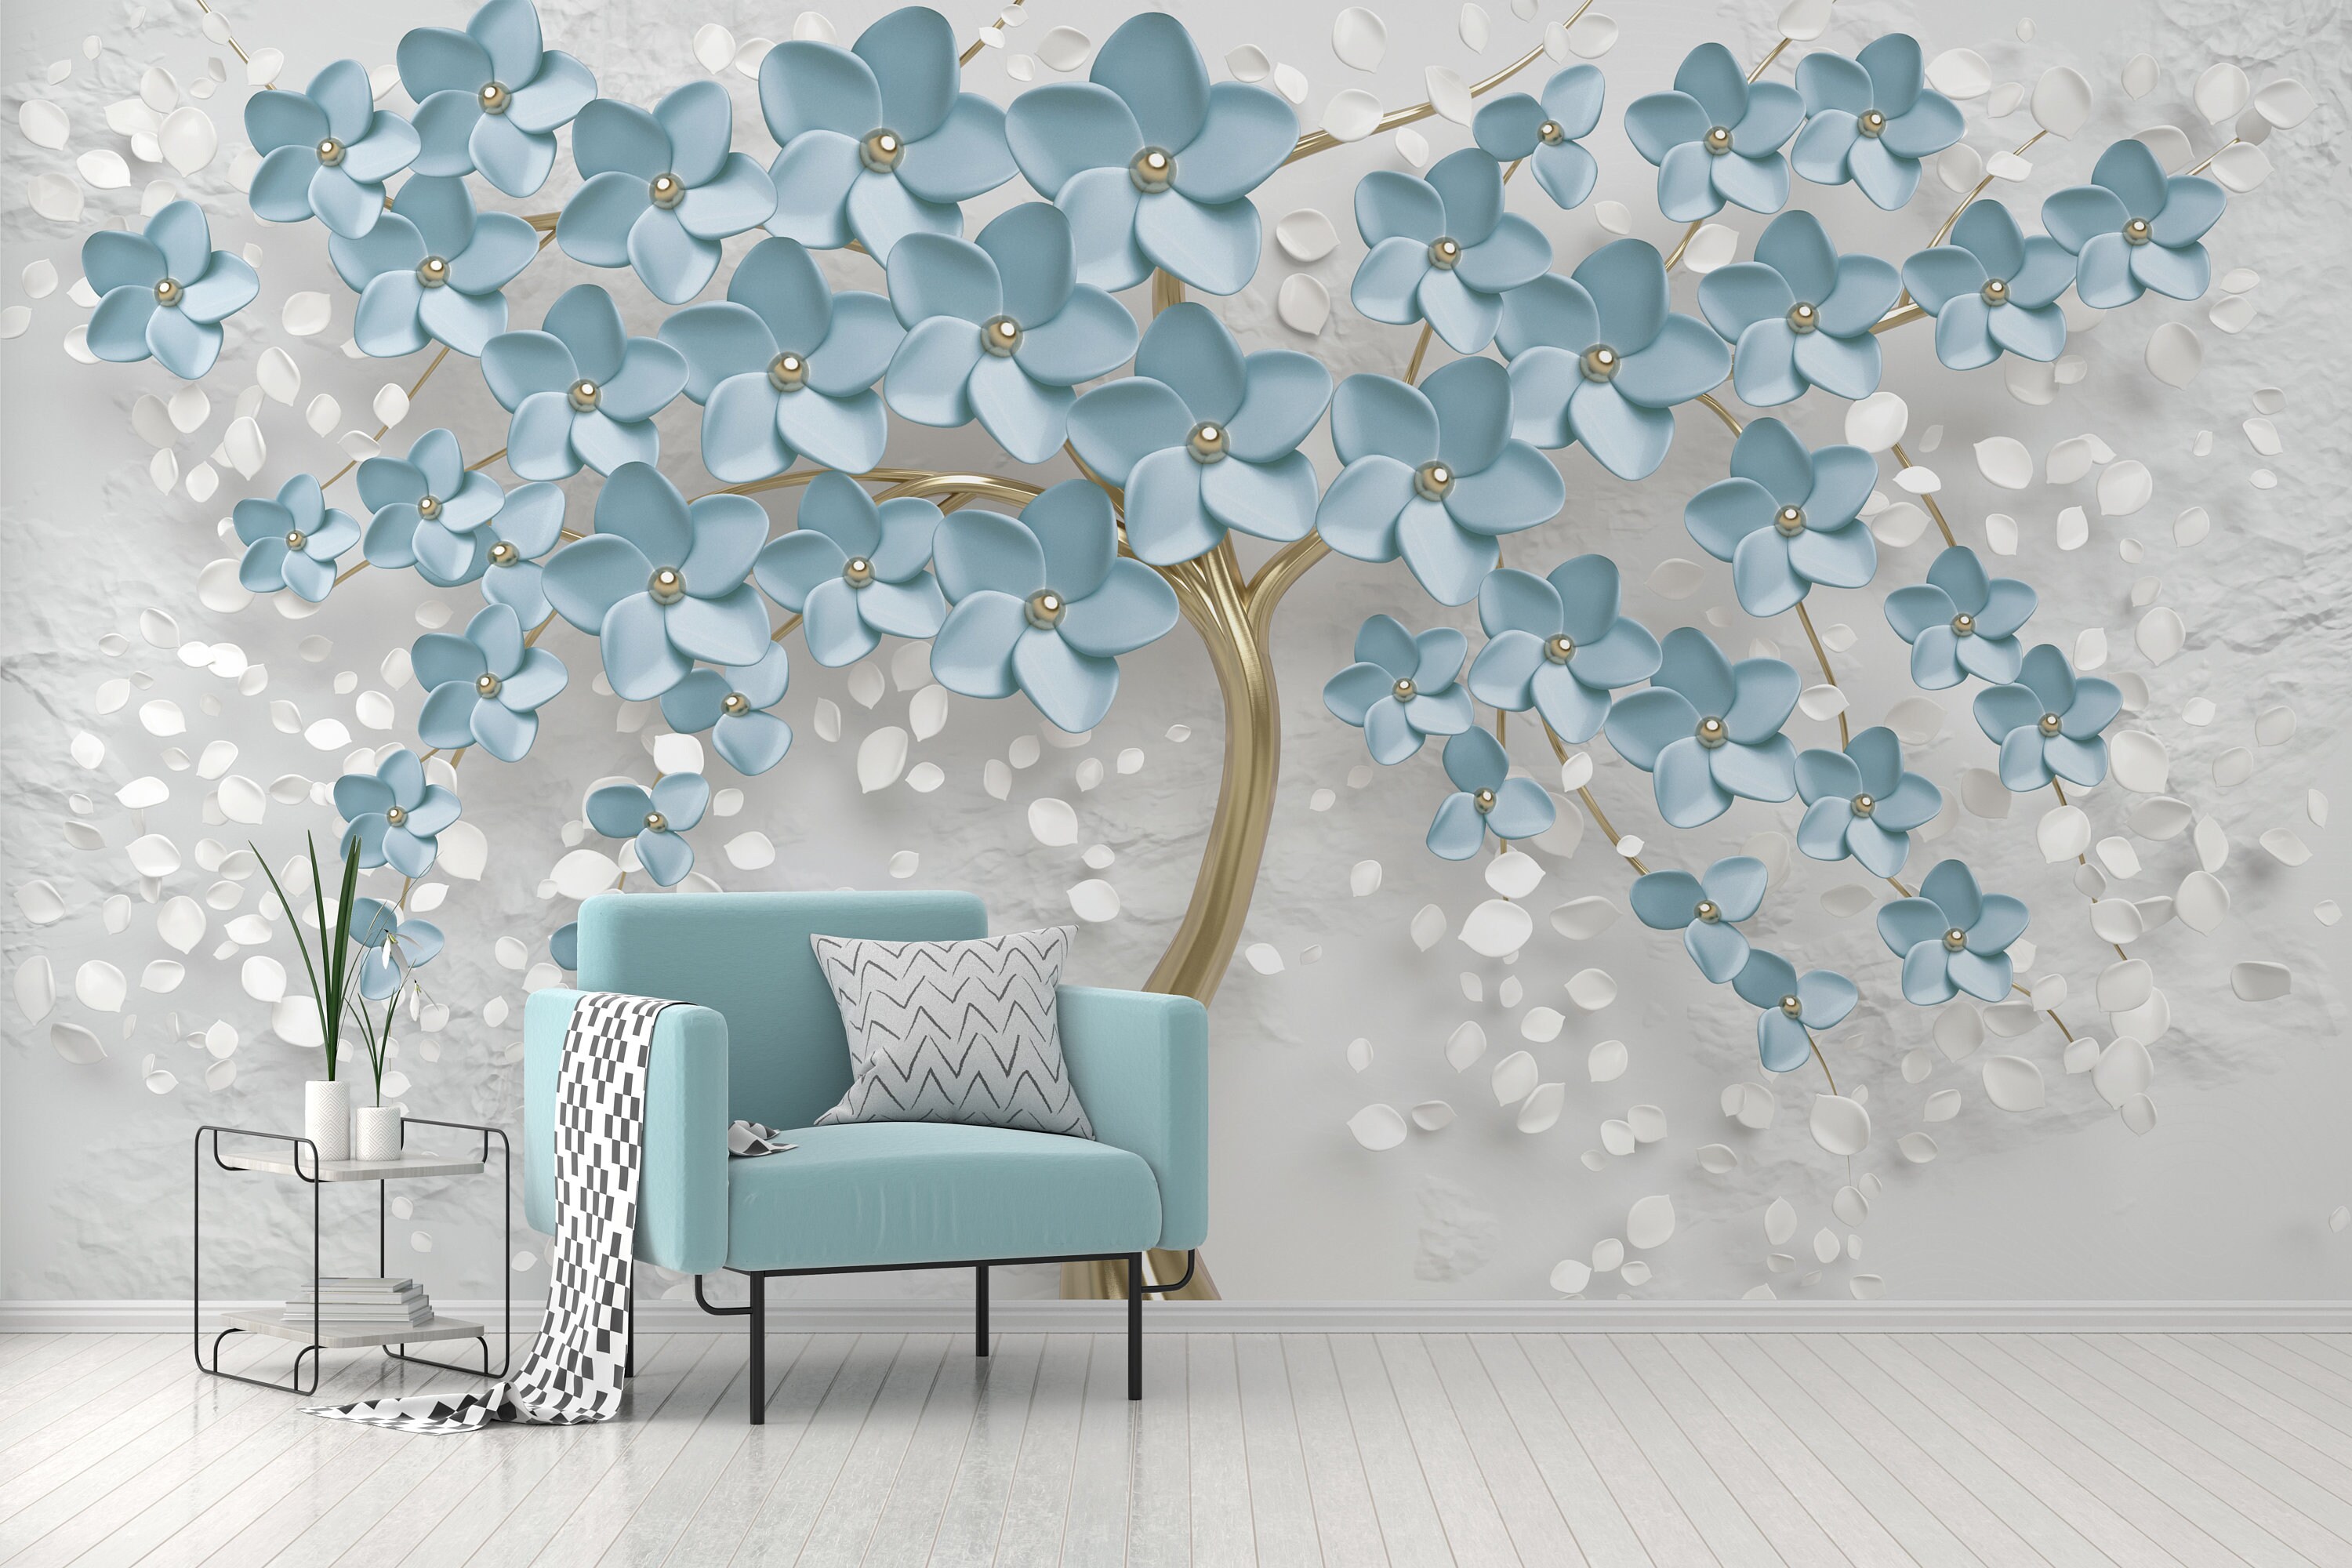 3D Flowers and Plants 457 Wall Paper Print Decal Deco Wall Mural